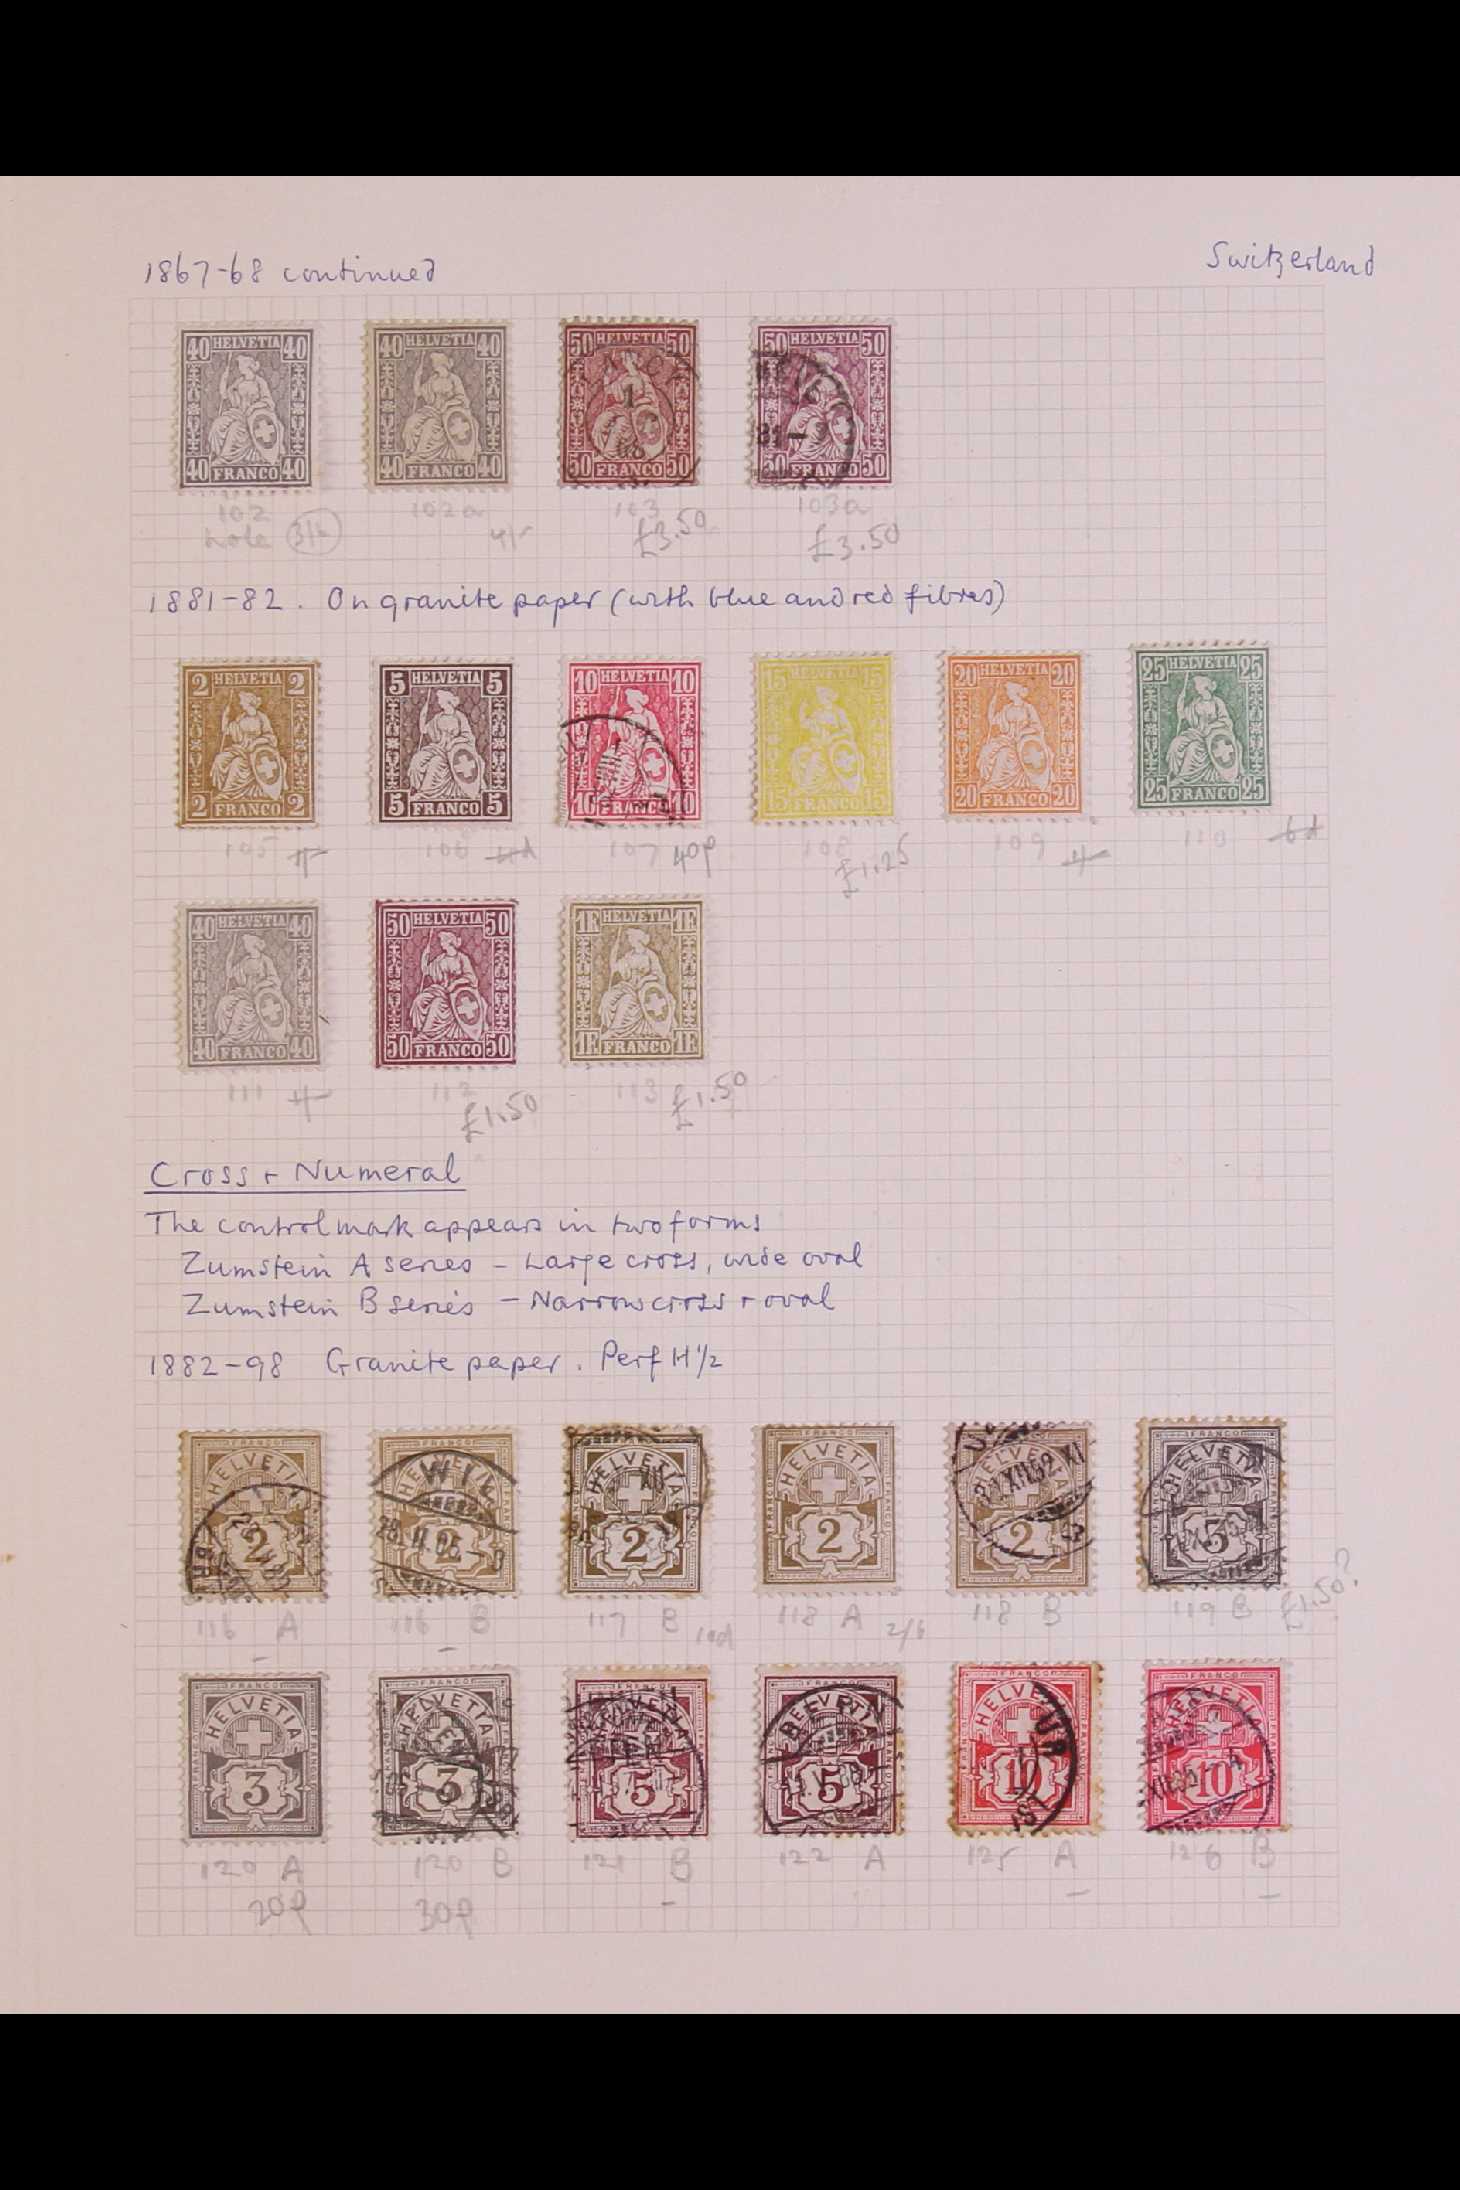 SWITZERLAND 1850 - 1959 COLLECTION of chiefly used stamps on leaves, incl 1850 5r & 10r, 1851 5r, - Image 3 of 17